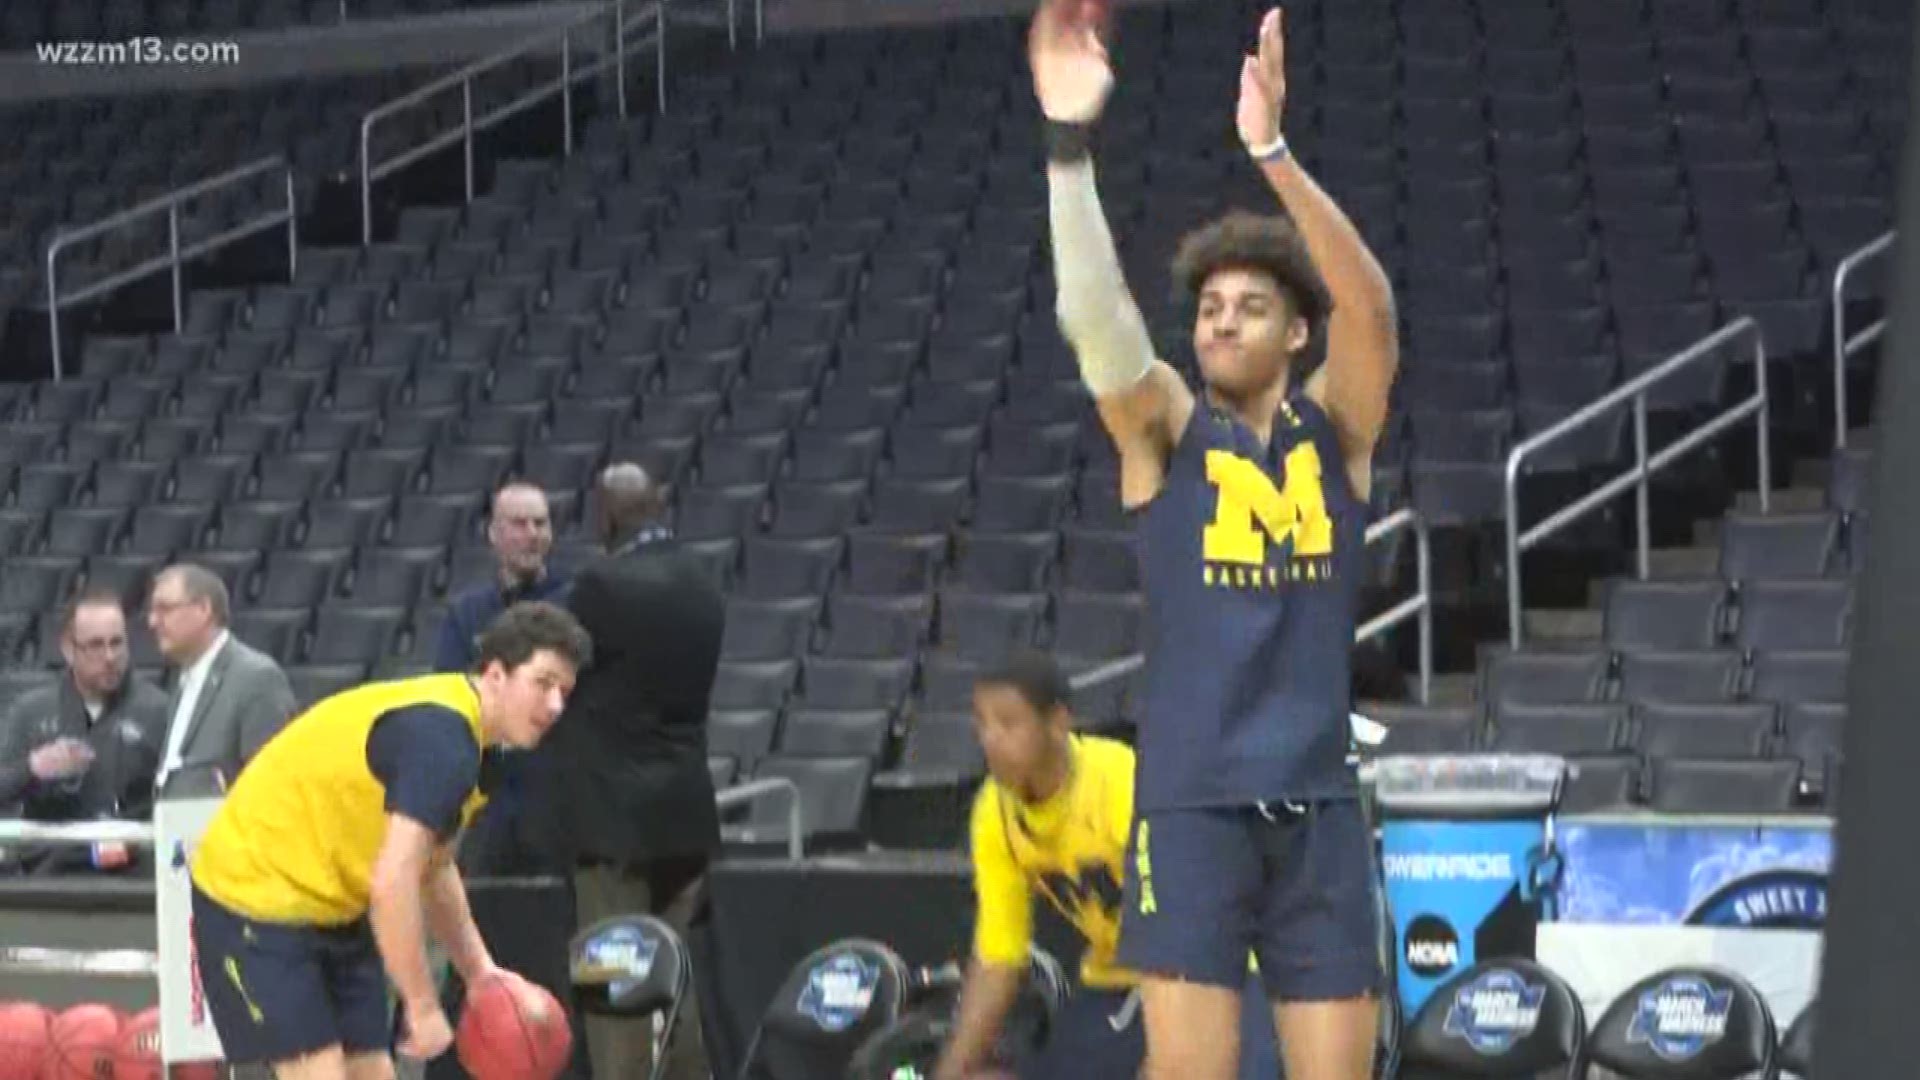 Michigan faces Texas A&M in Los Angeles, Sweet 16